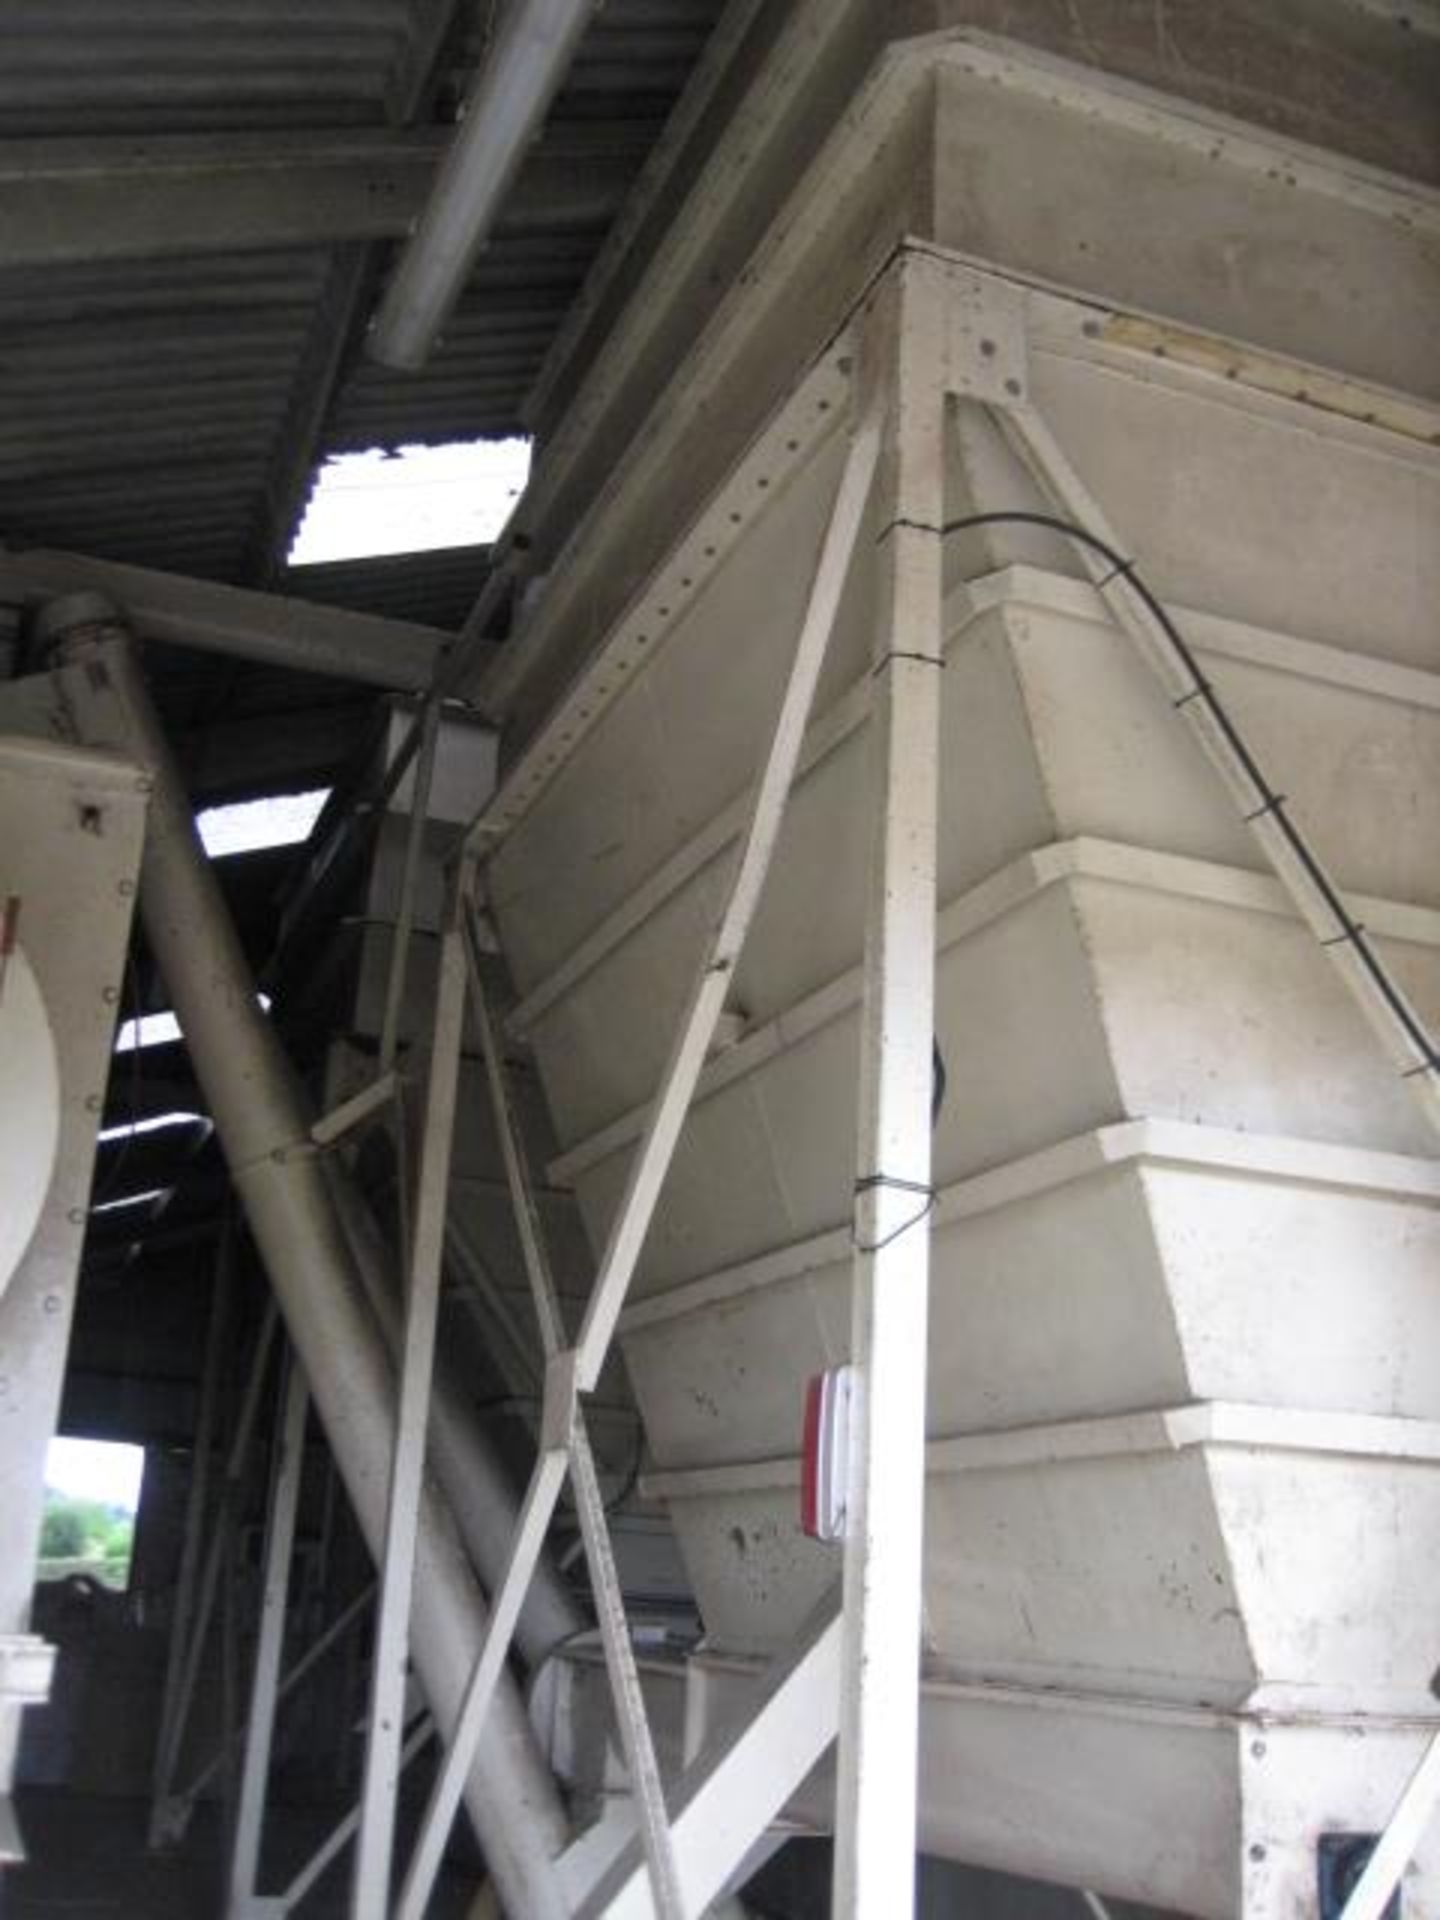 Storage Hopper – Two Hoppers, with tapered screw dischargers on the outlets. The hoppers are 3.2M - Bild 7 aus 7